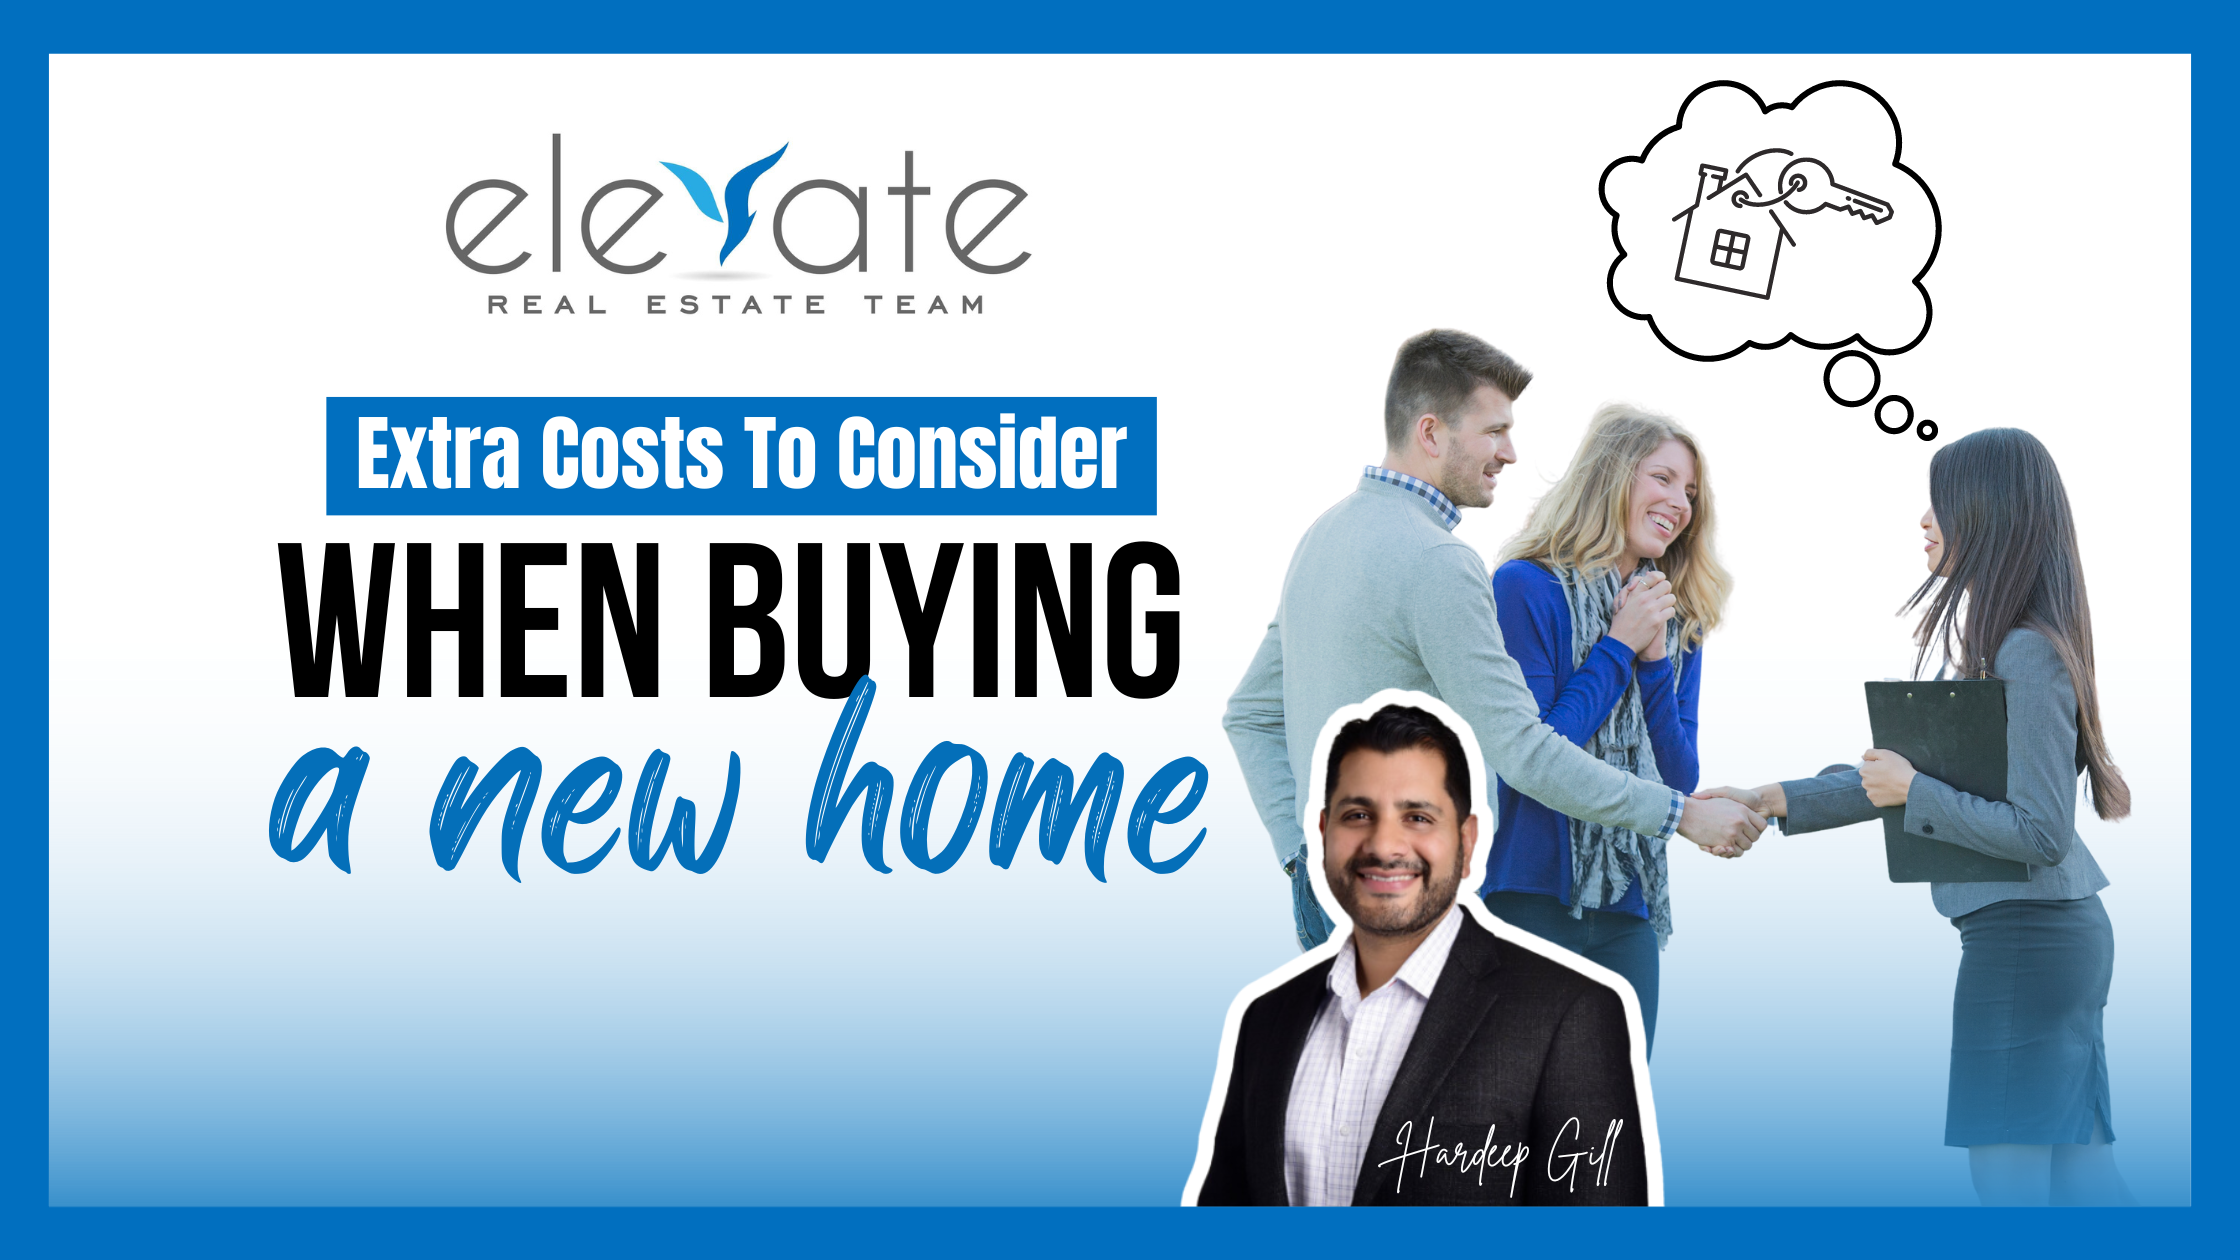 EXTRA COSTS TO CONSIDER When Buying a Home